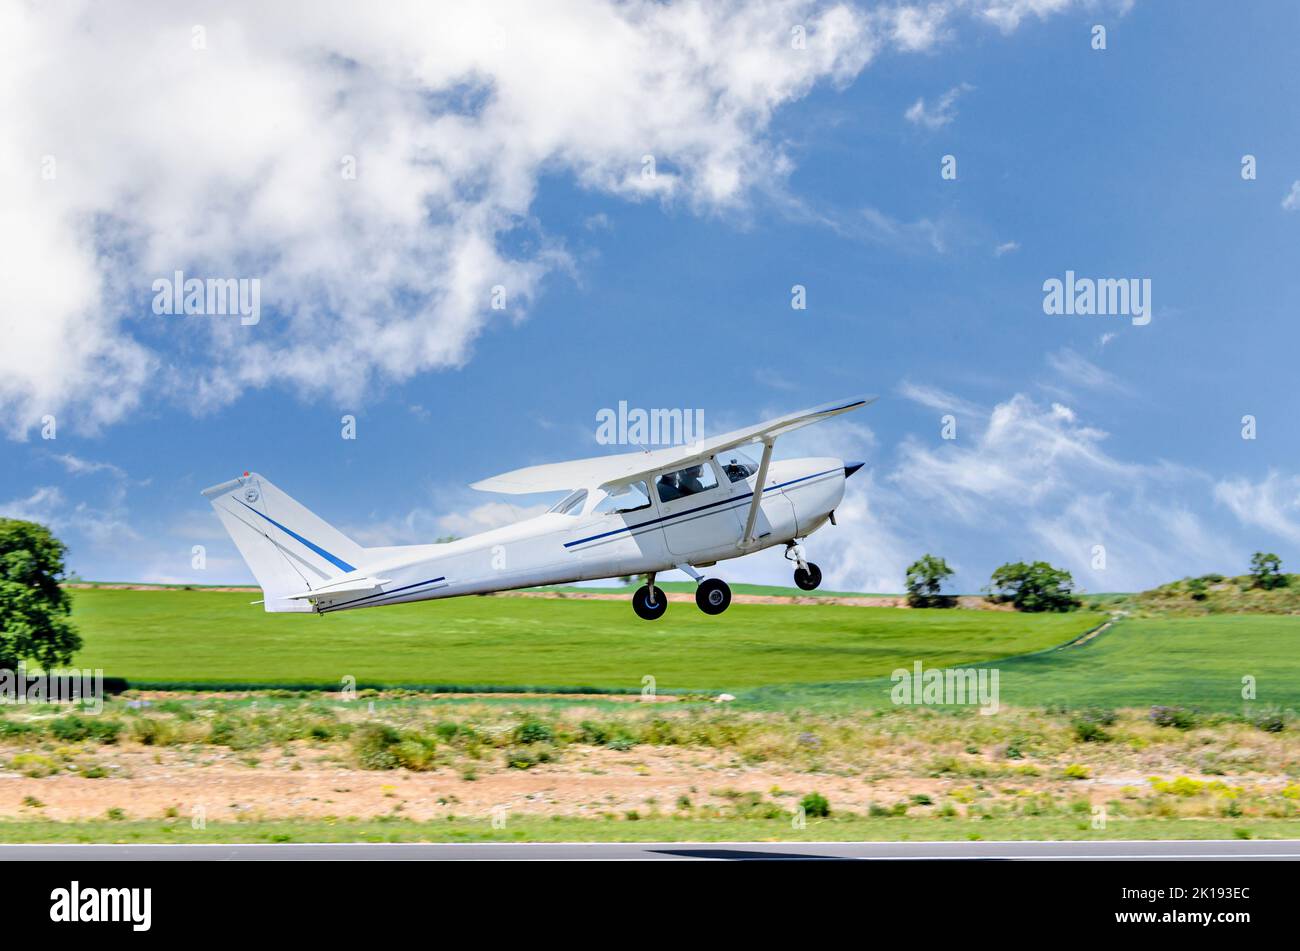 Single engine ultralight airplane taking off from airfield under blue sky with white clouds Stock Photo